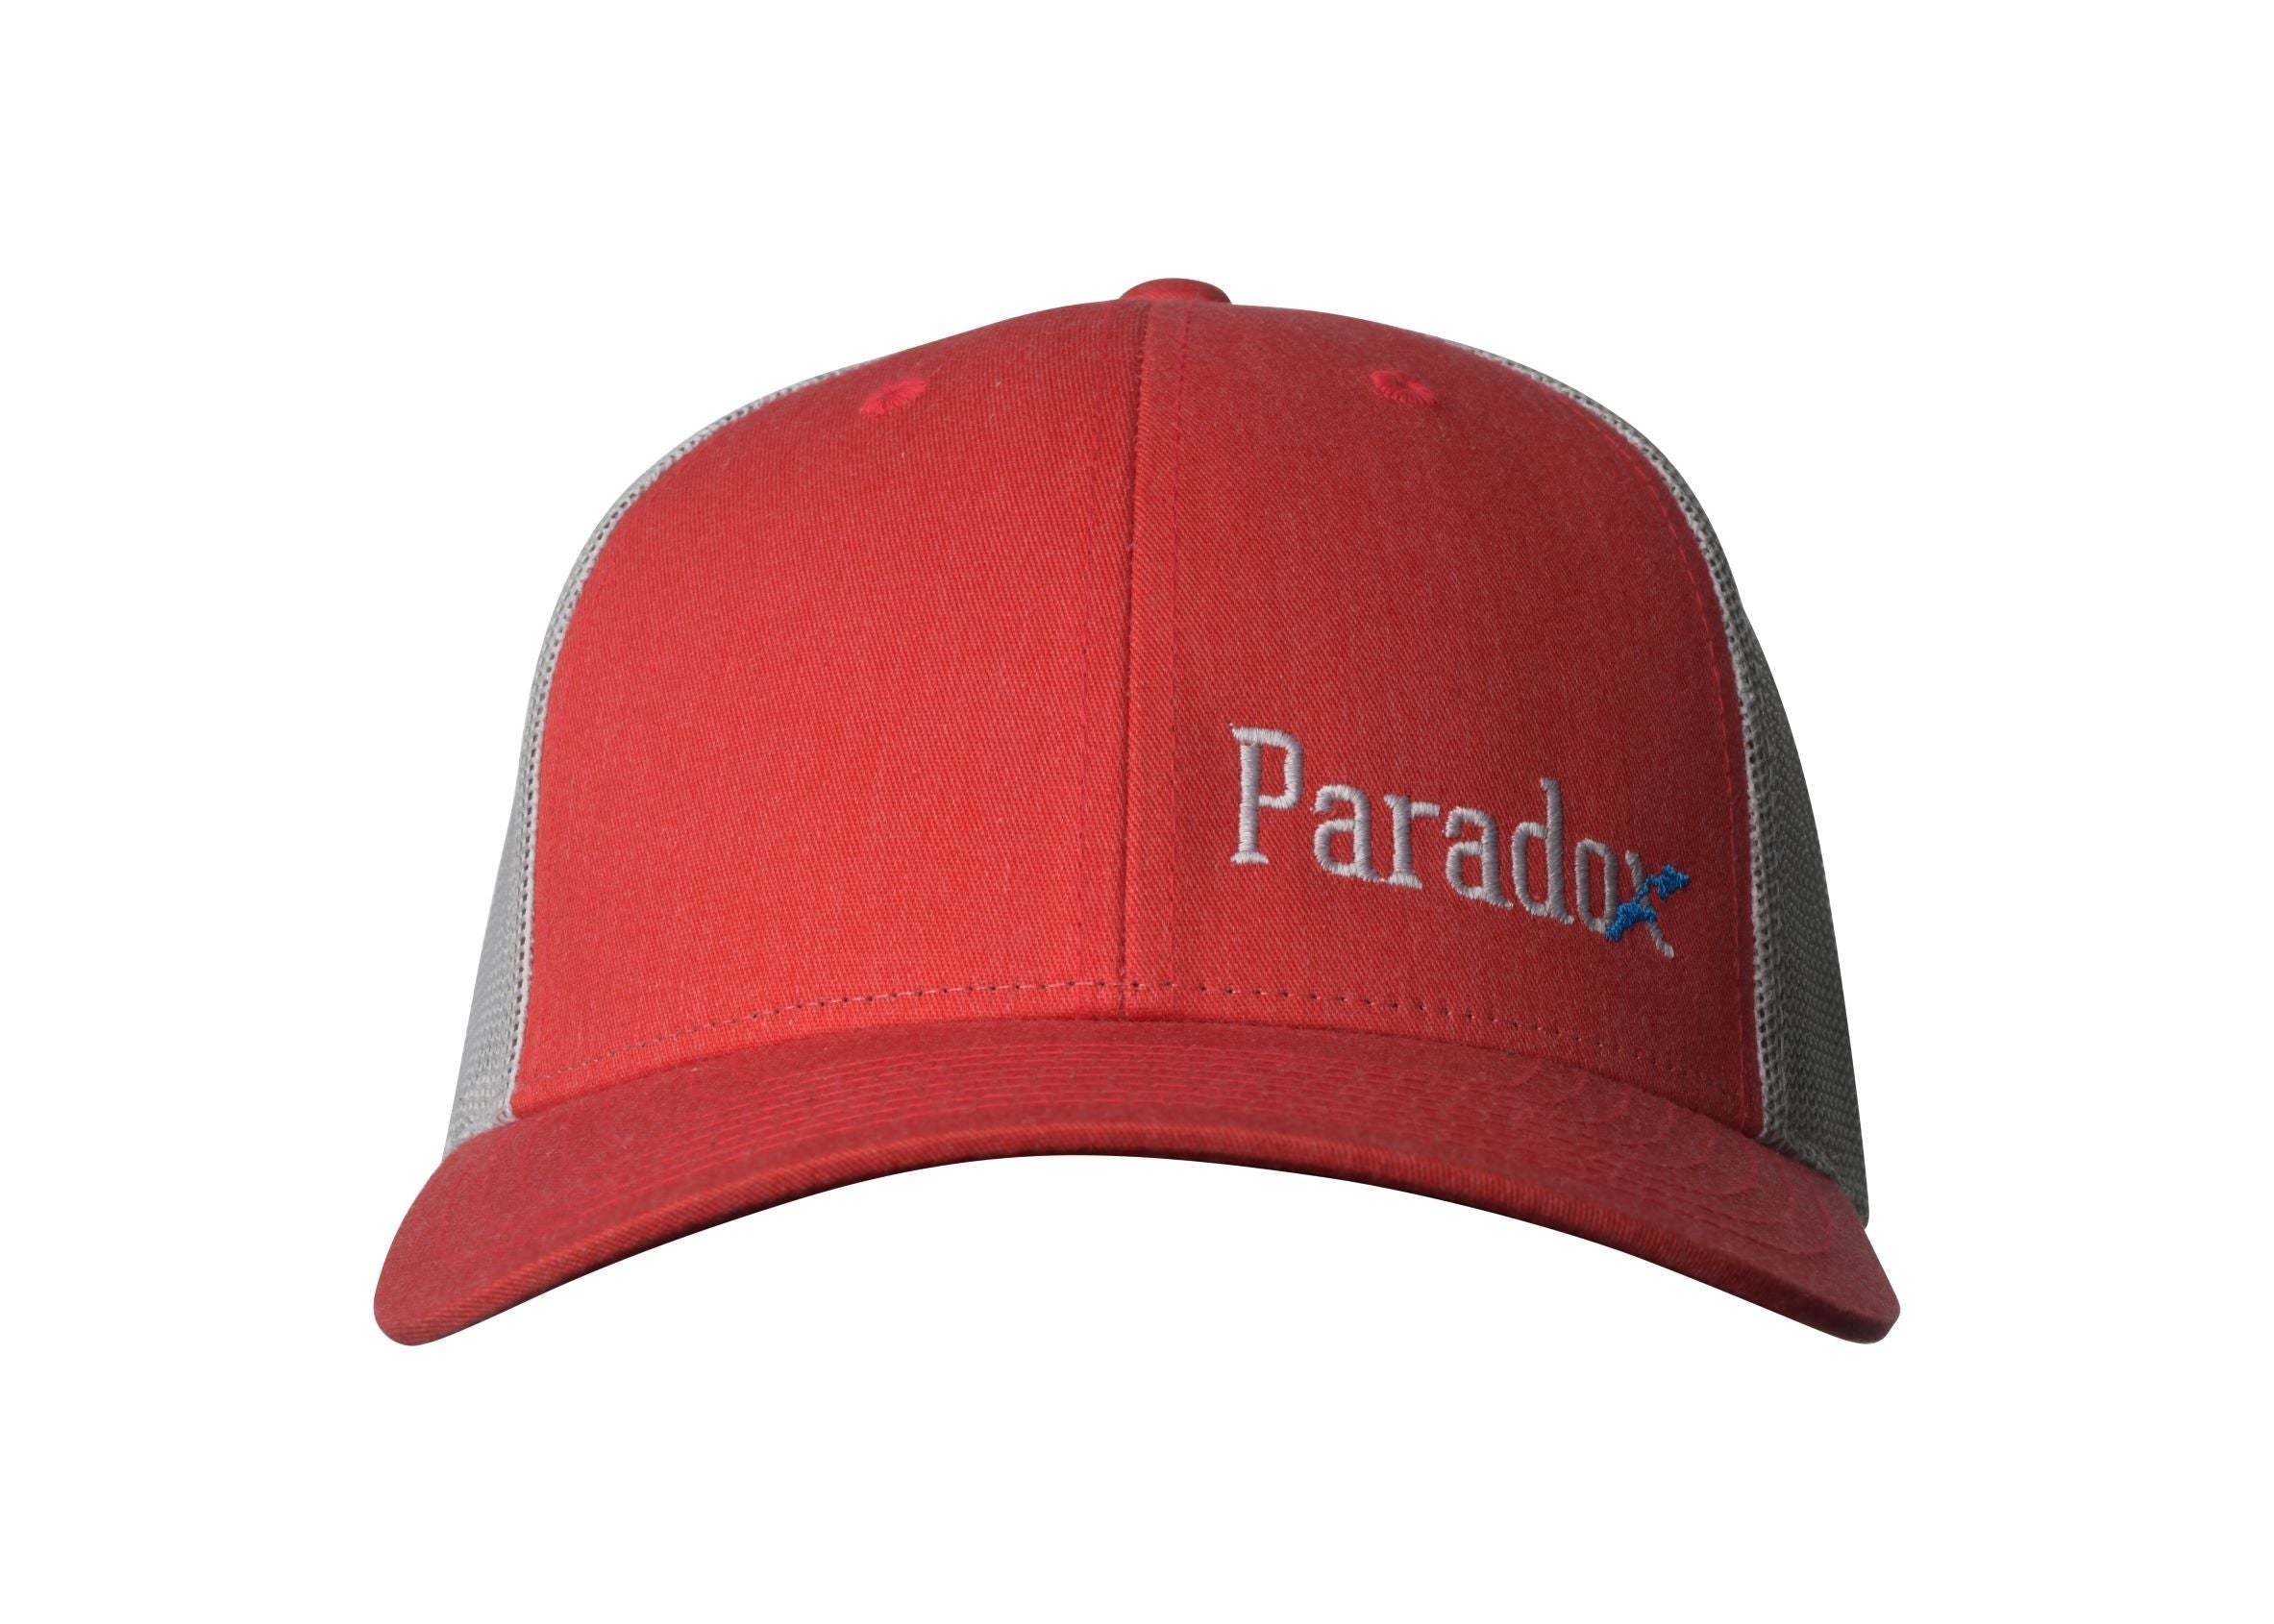 The Paradox Hat